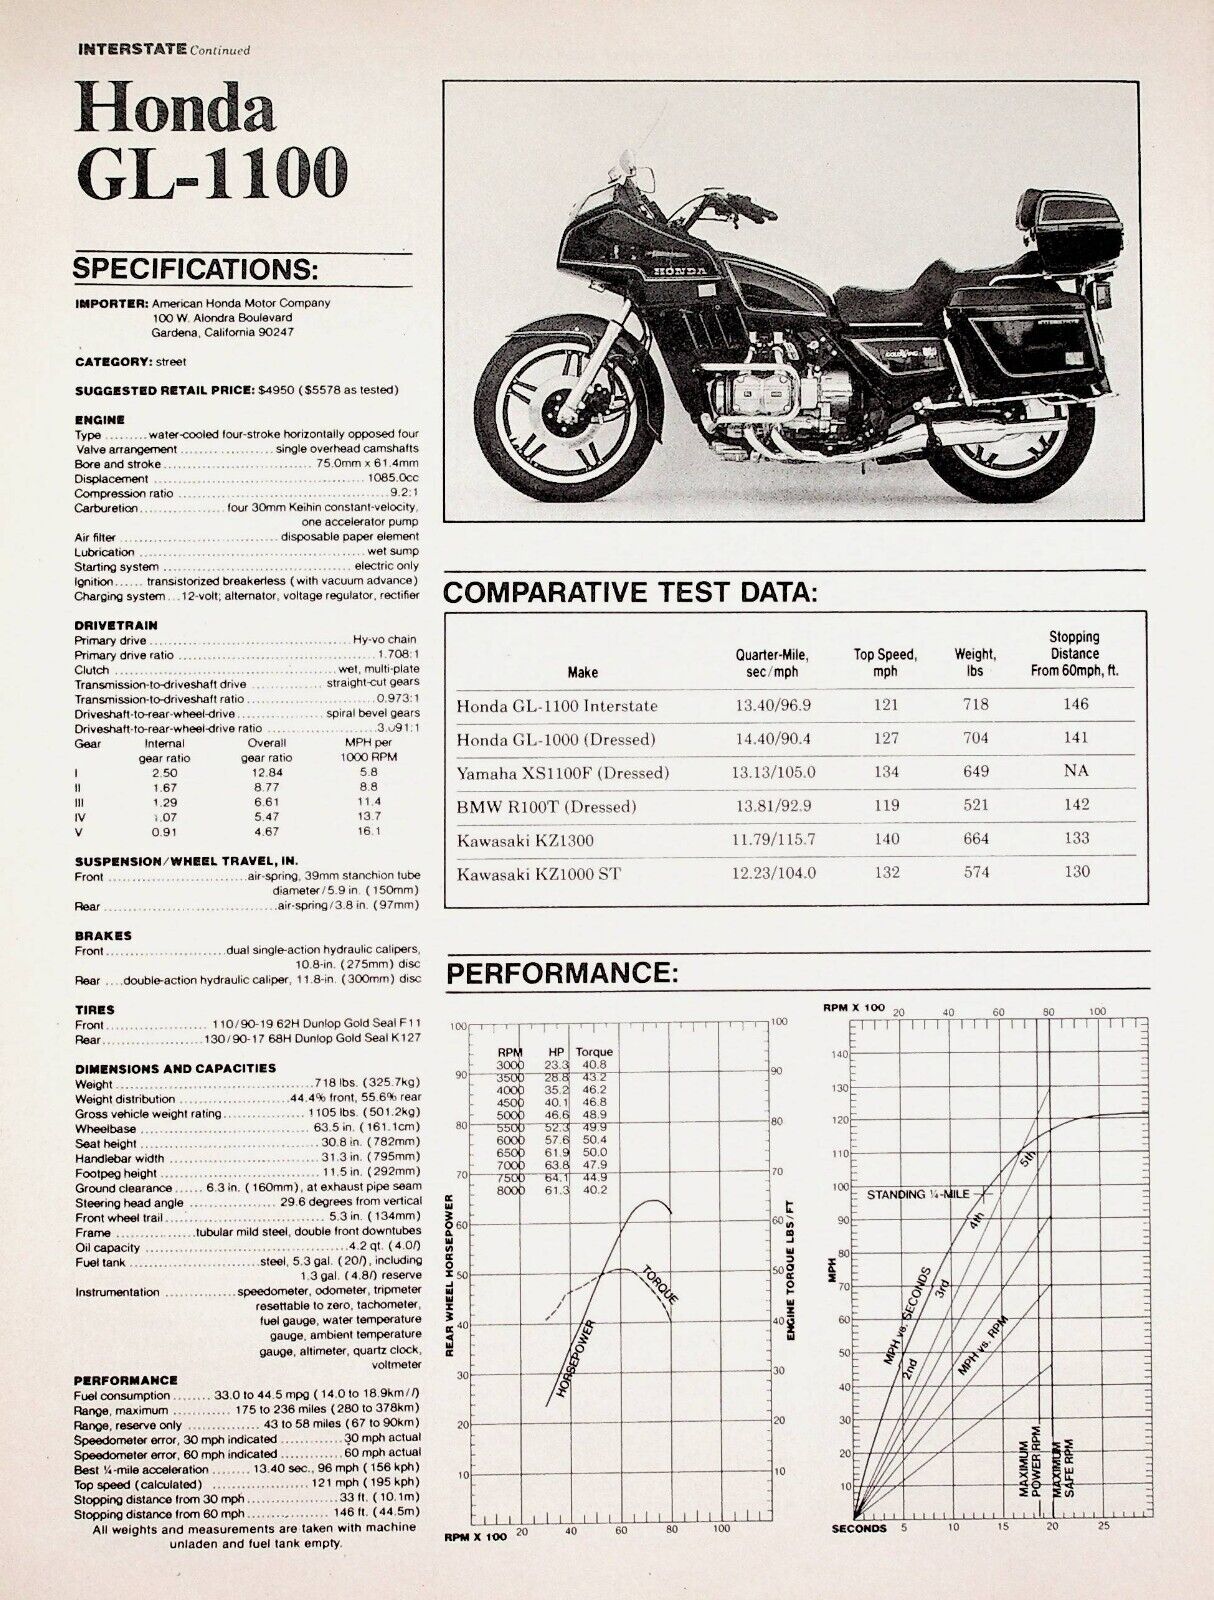 1980 Honda GL1100 Interstate Gold Wing - 7-Page Vintage Motorcycle Test Article